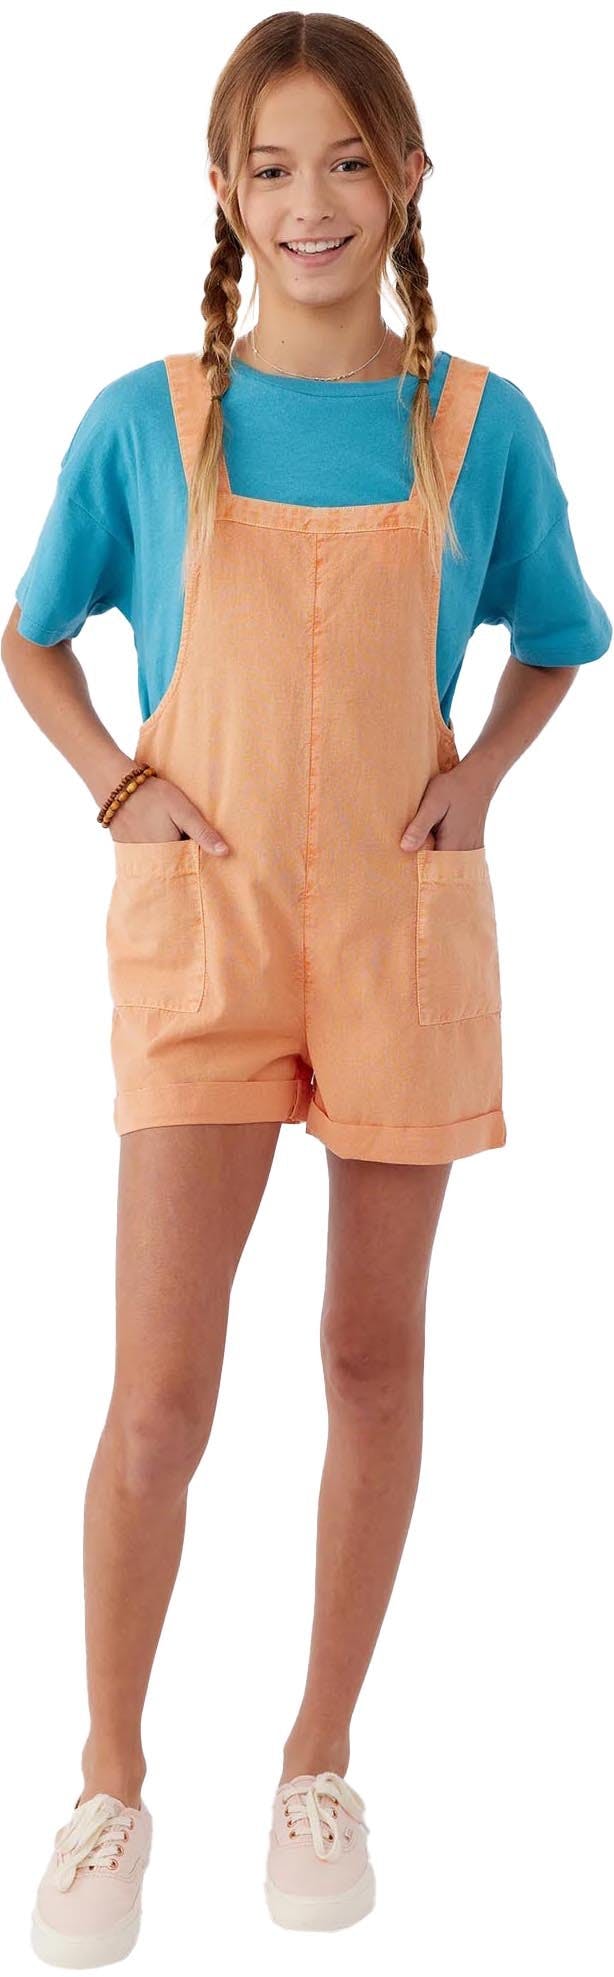 Product image for Starlette Overall - Girls